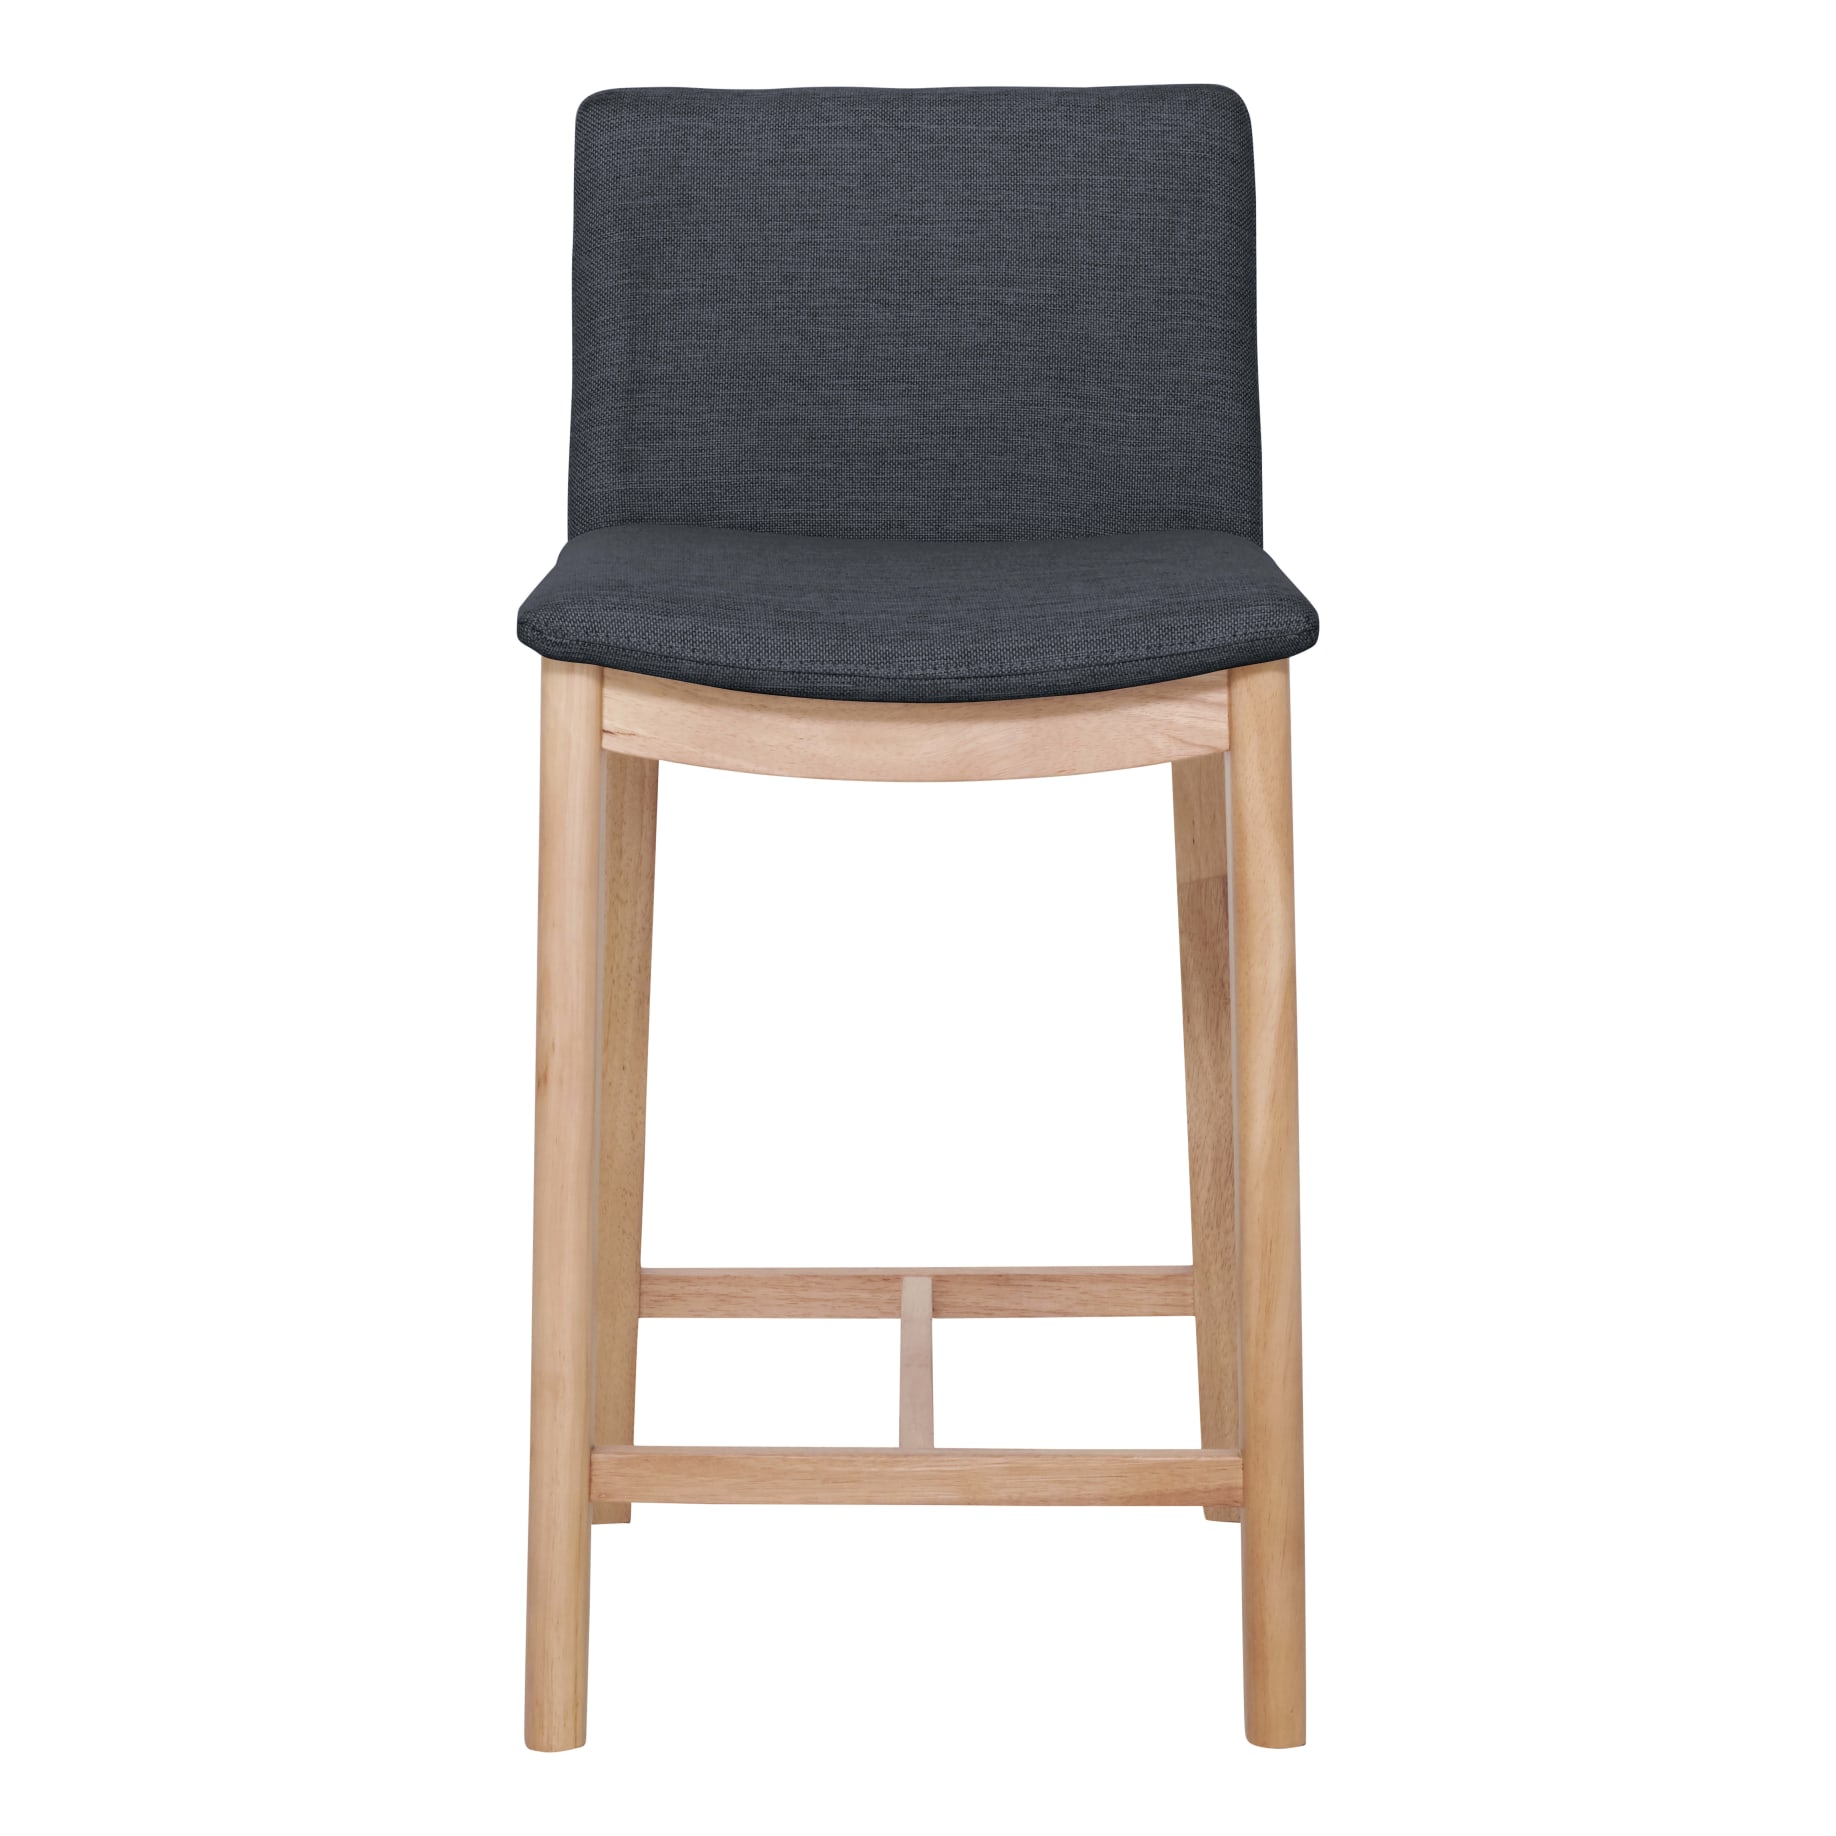 Everest Bar Chair in City Grey / Oak Stain